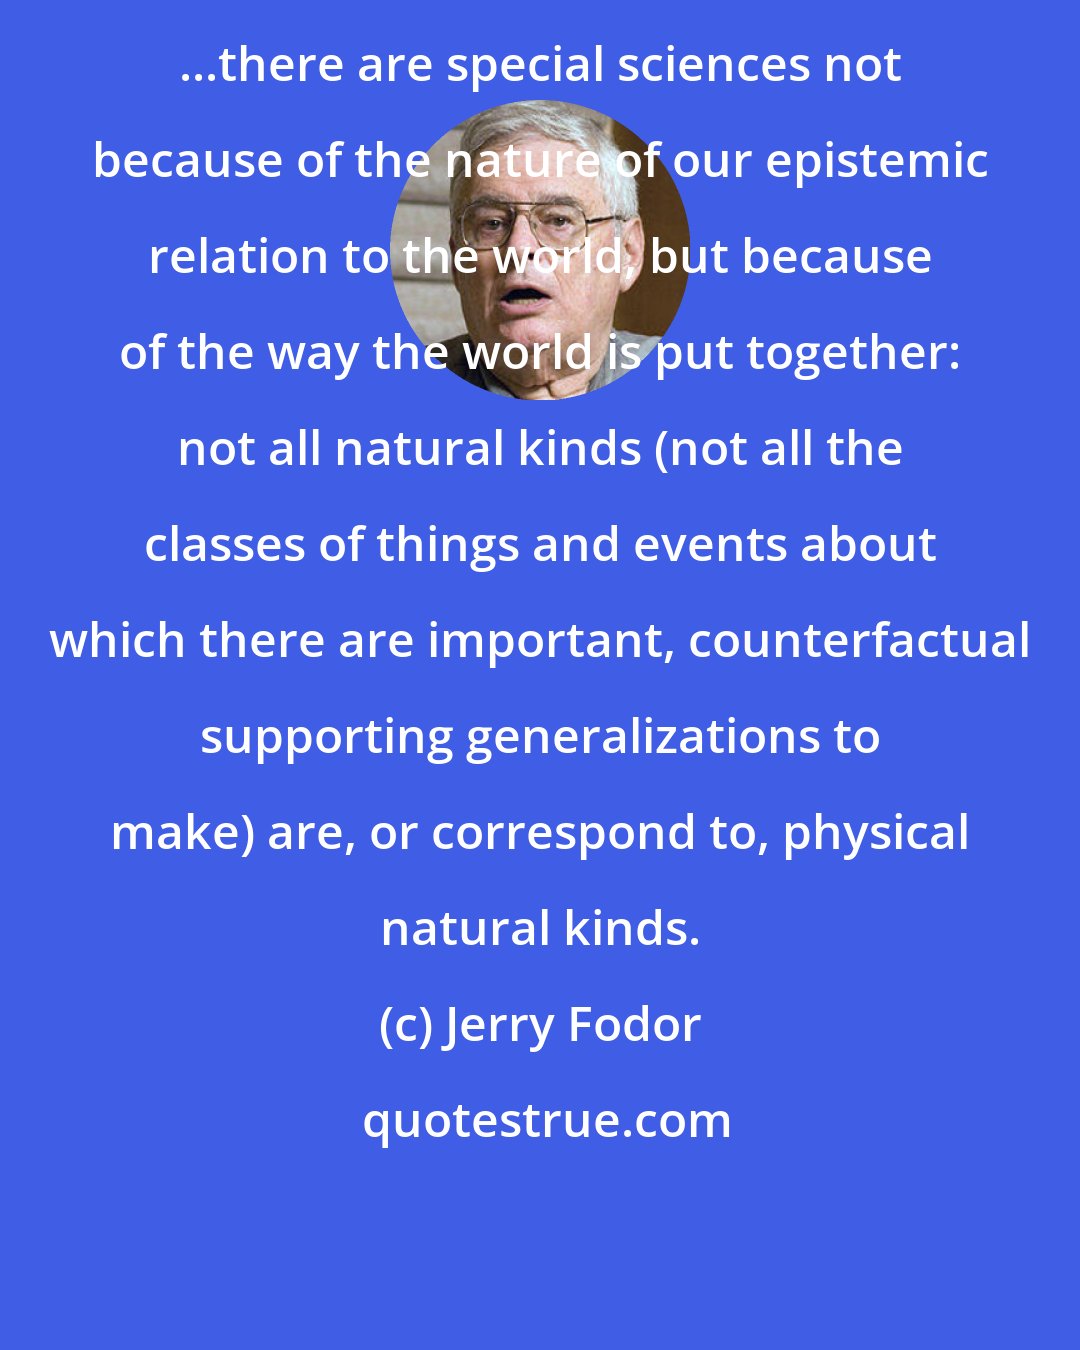 Jerry Fodor: ...there are special sciences not because of the nature of our epistemic relation to the world, but because of the way the world is put together: not all natural kinds (not all the classes of things and events about which there are important, counterfactual supporting generalizations to make) are, or correspond to, physical natural kinds.